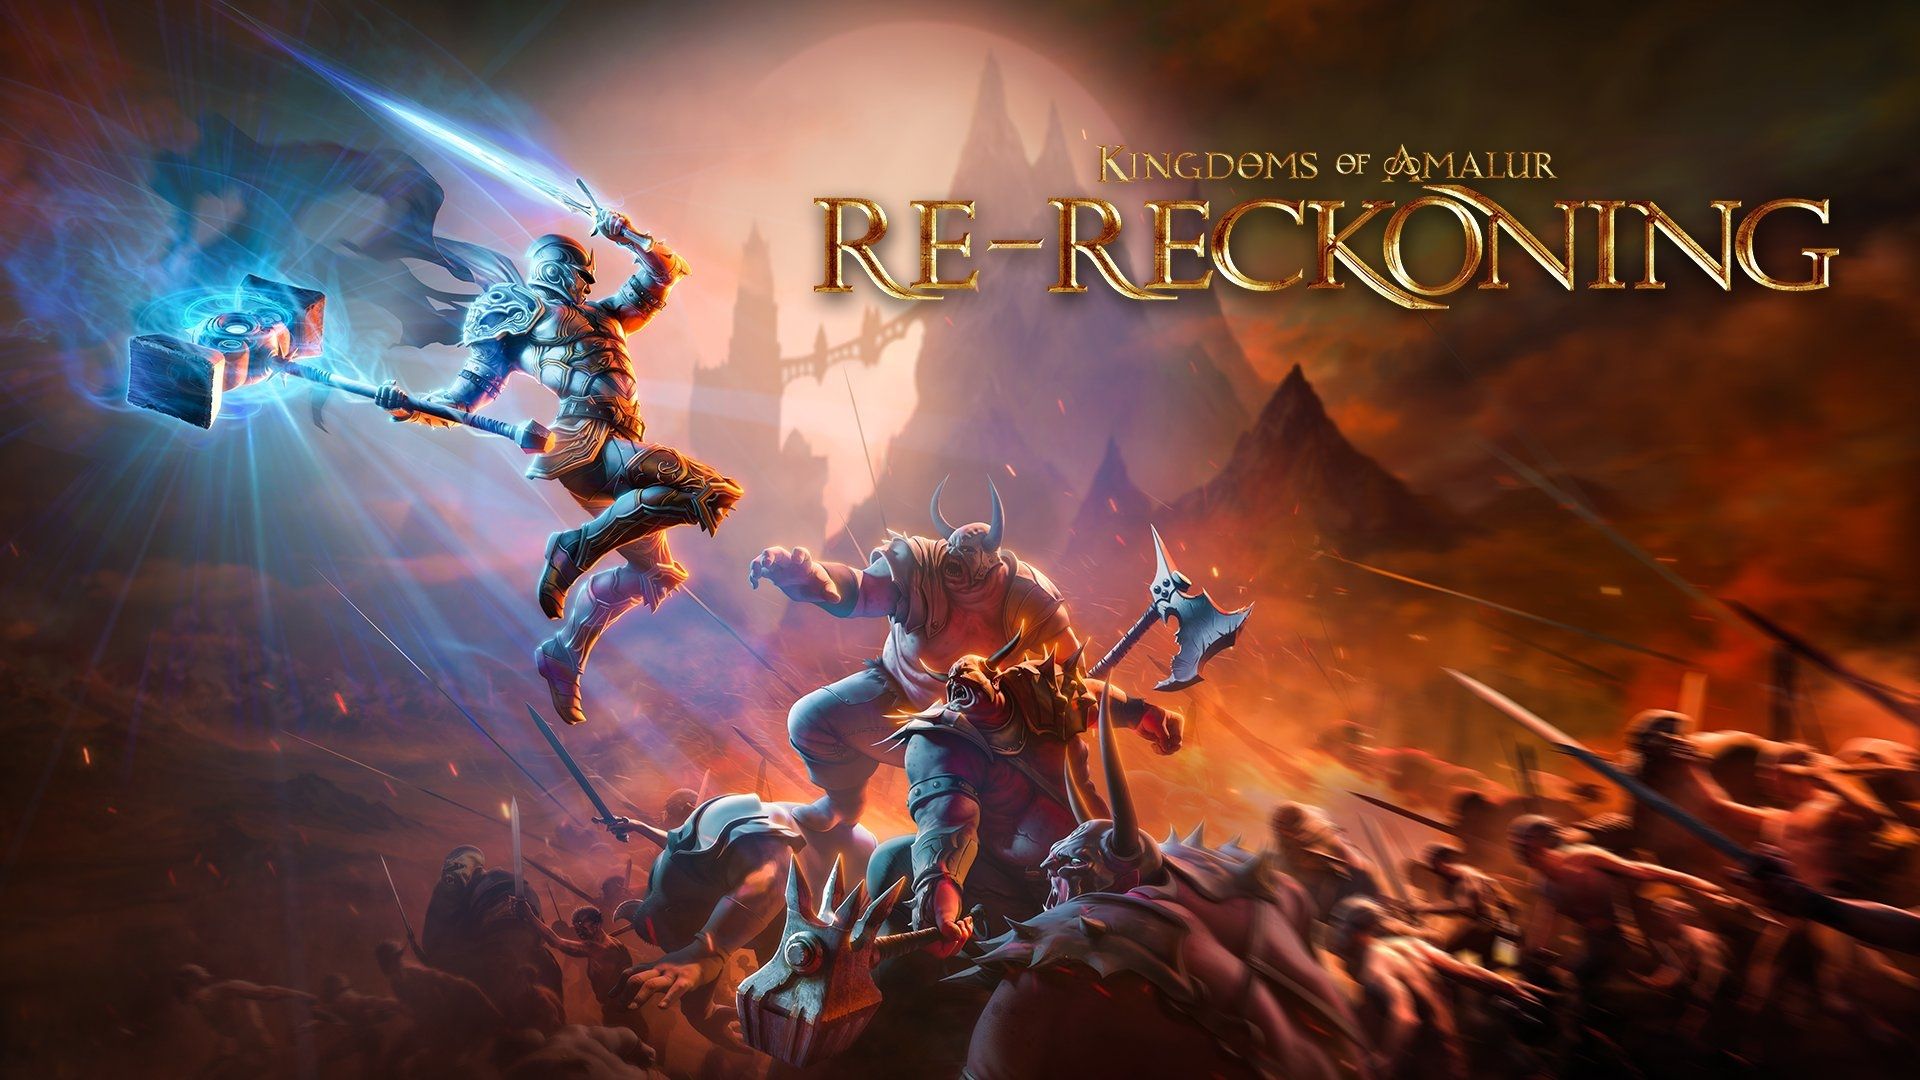 Kingdoms of Amalur: Re-Reckoning is Getting a nintendo Switch Release